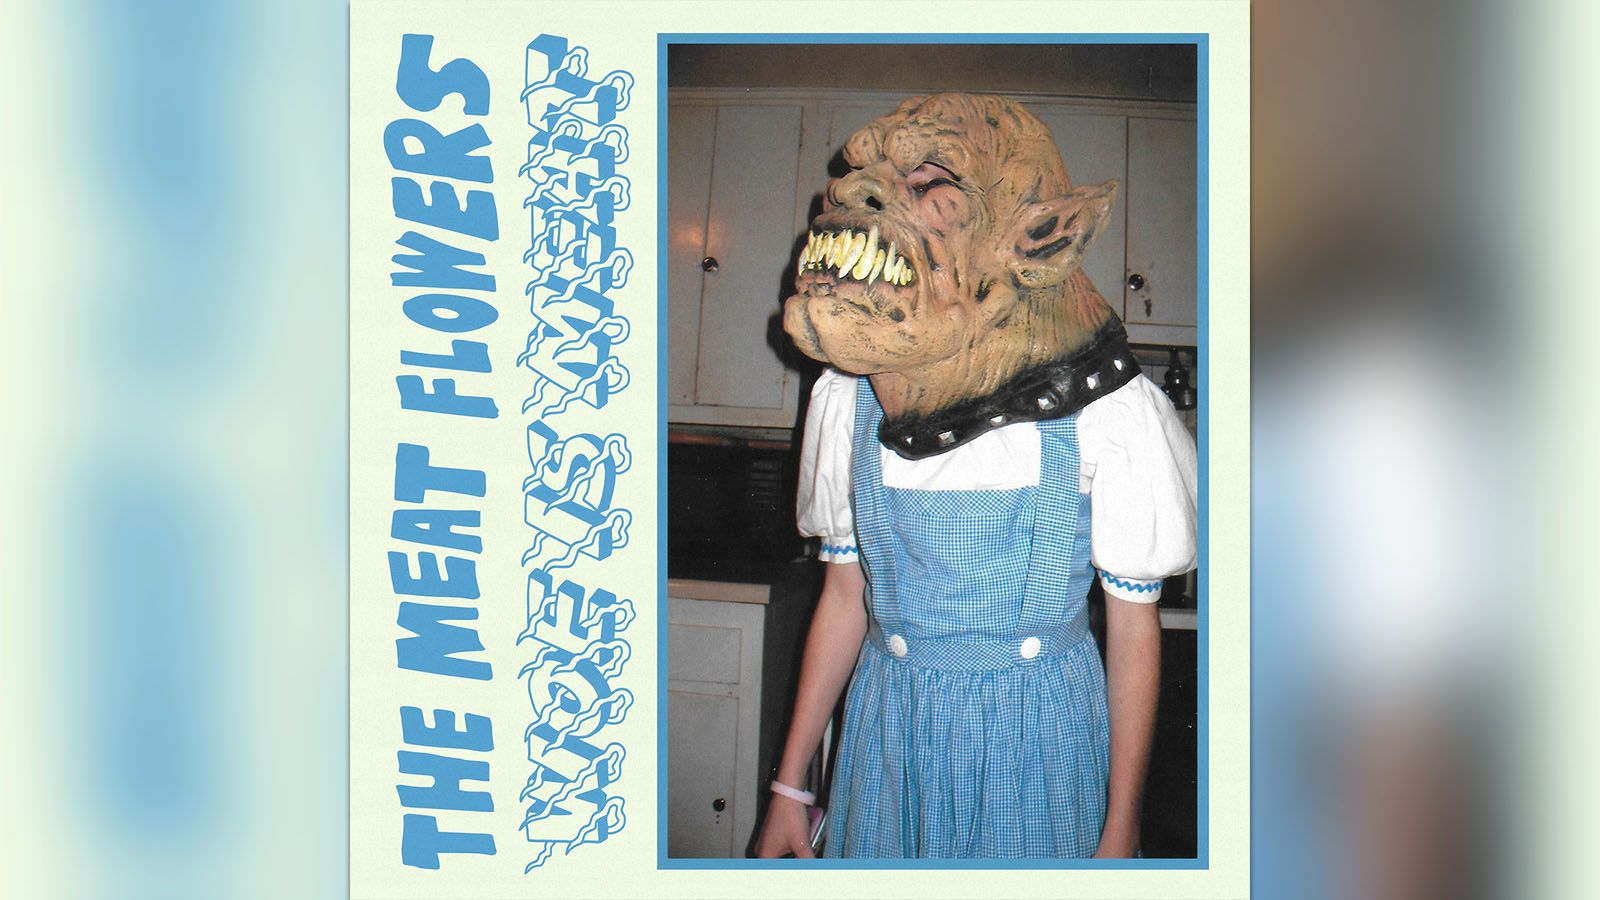 The Meat Flowers second album, "Woe Is Meat," is now available.